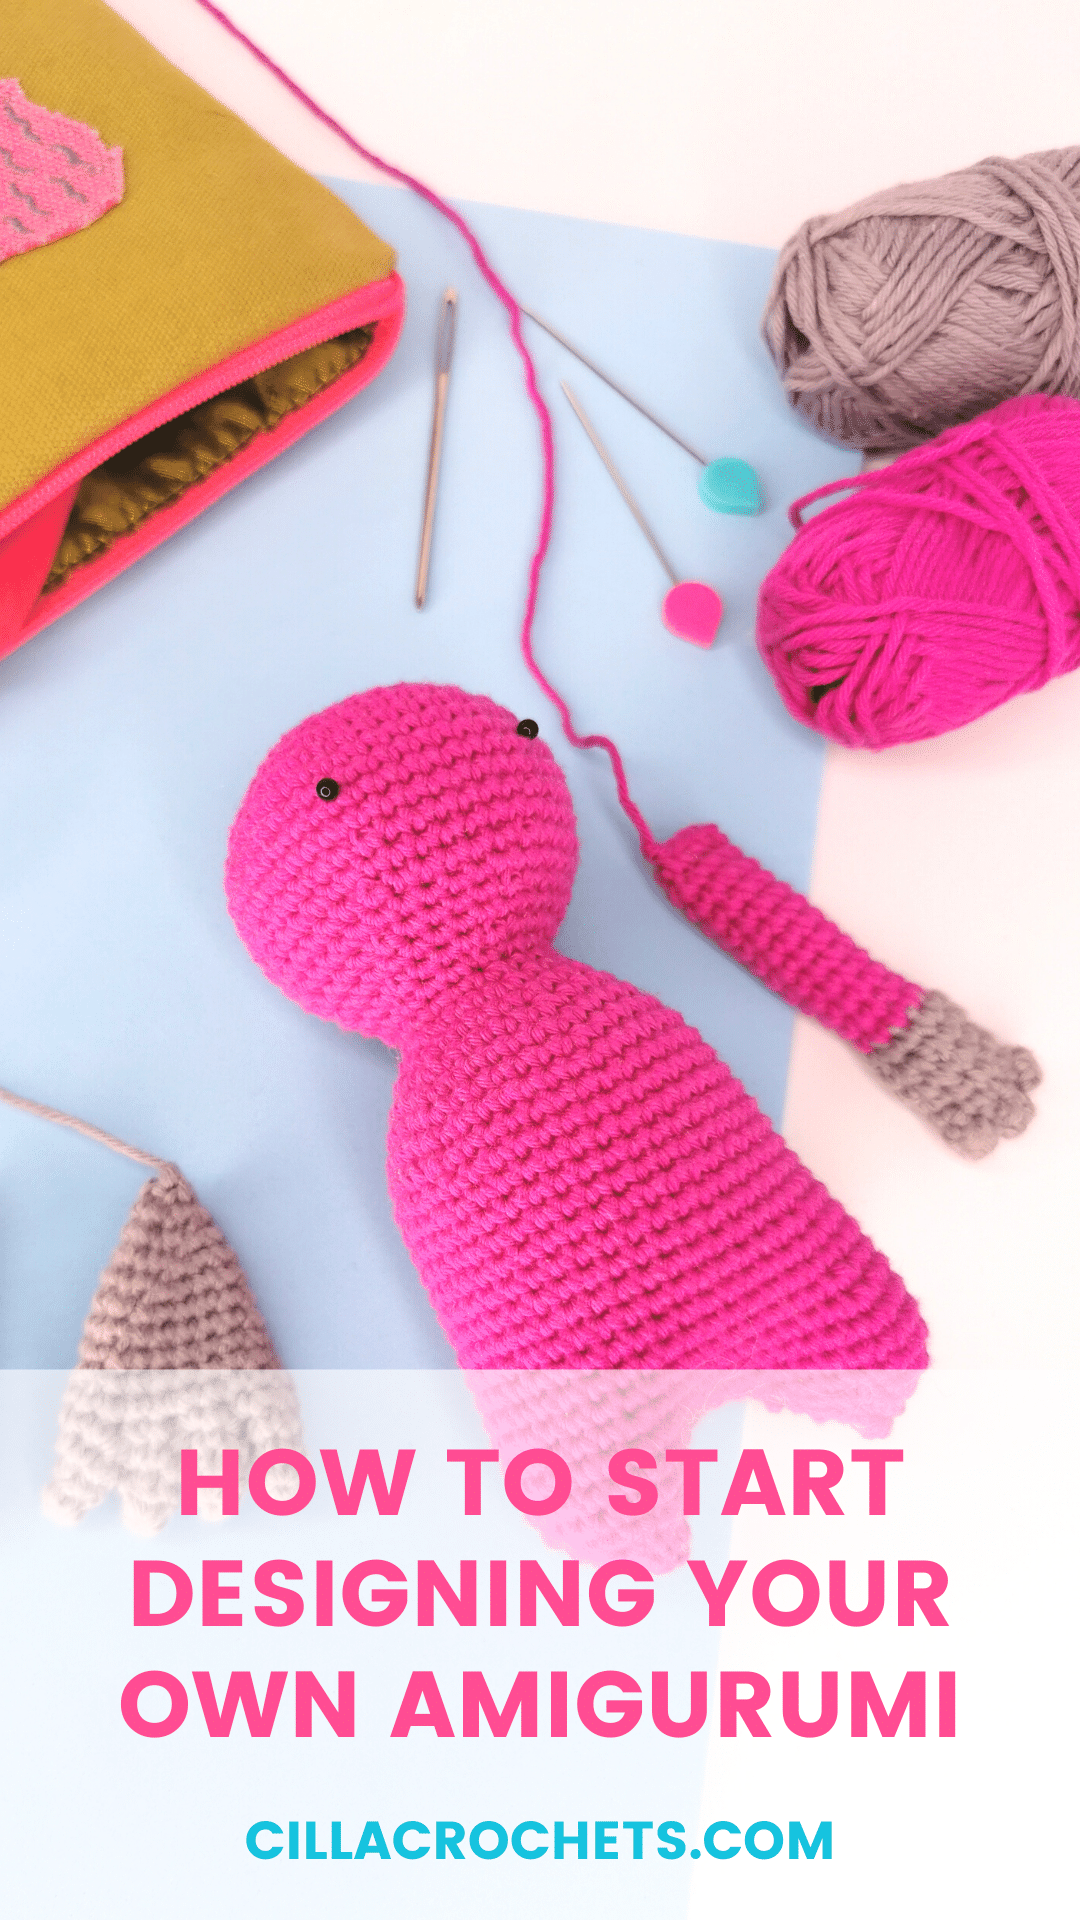 How to Test Yarn for Amigurumi  Choose the BEST Yarn Every Time